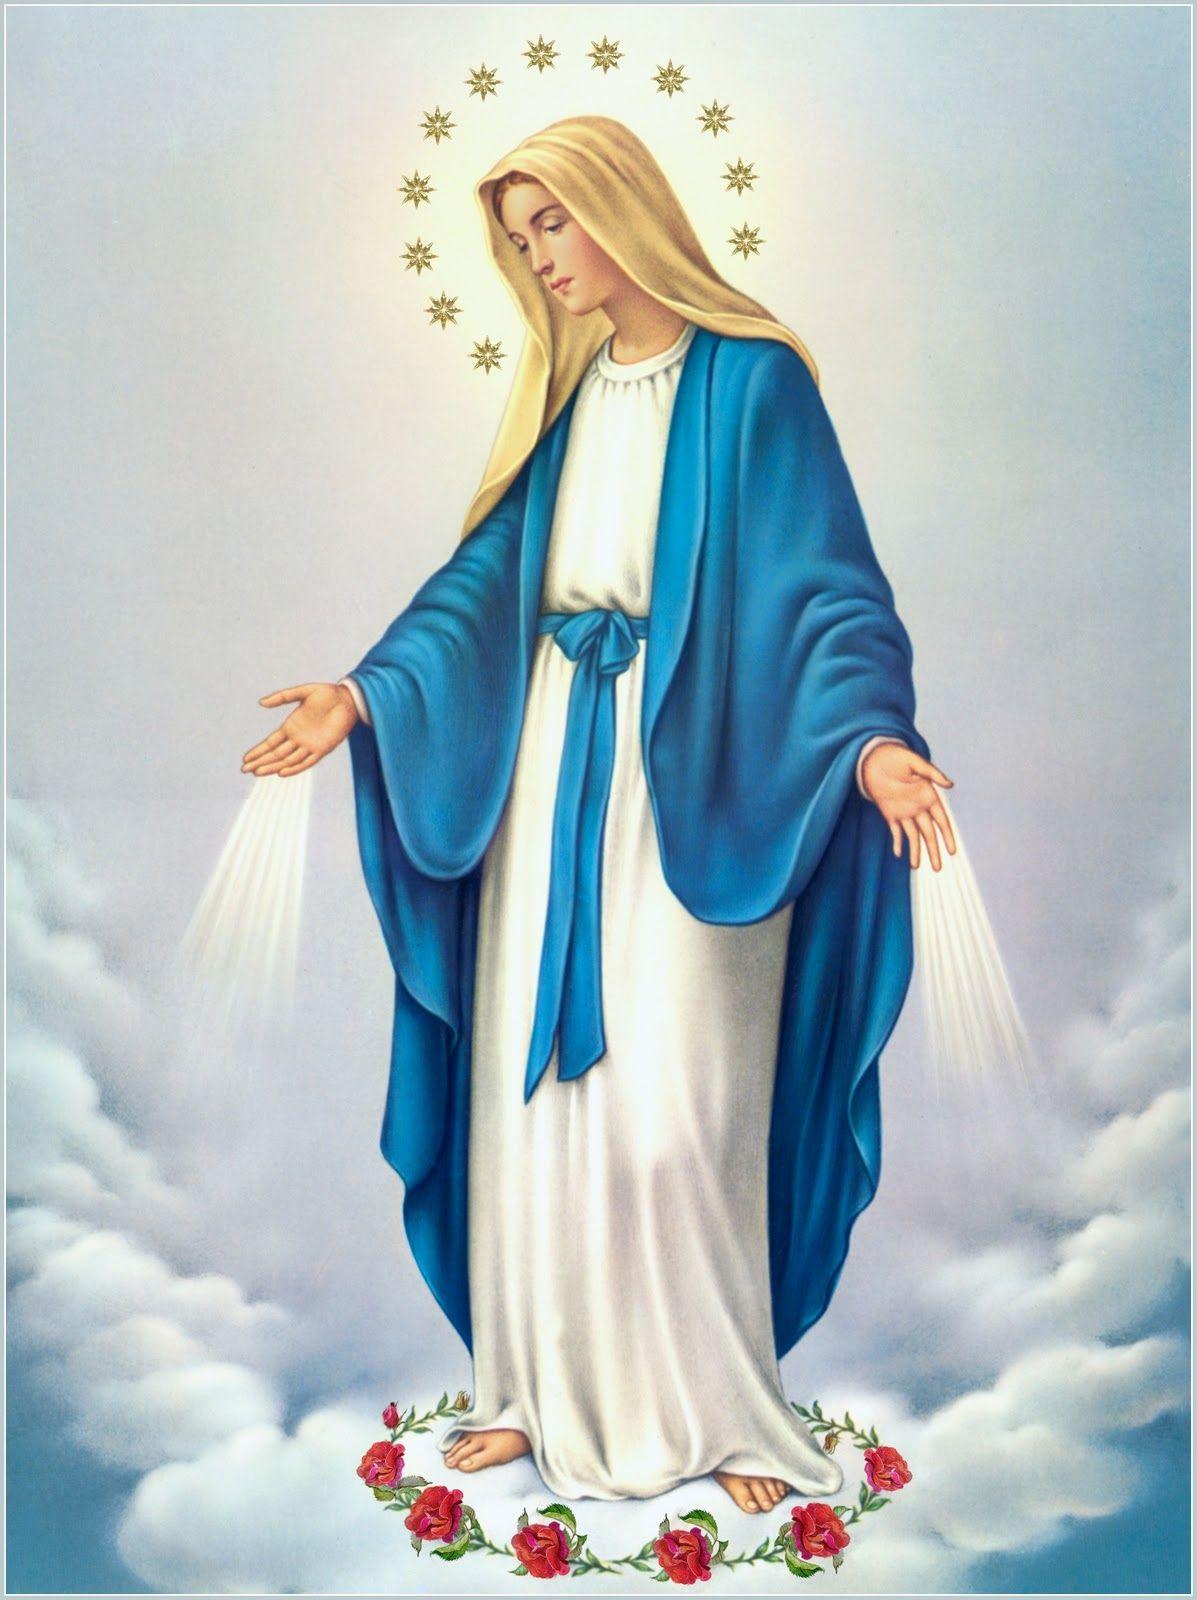 The Culture of Life: The Feast Of The Immaculate Conception